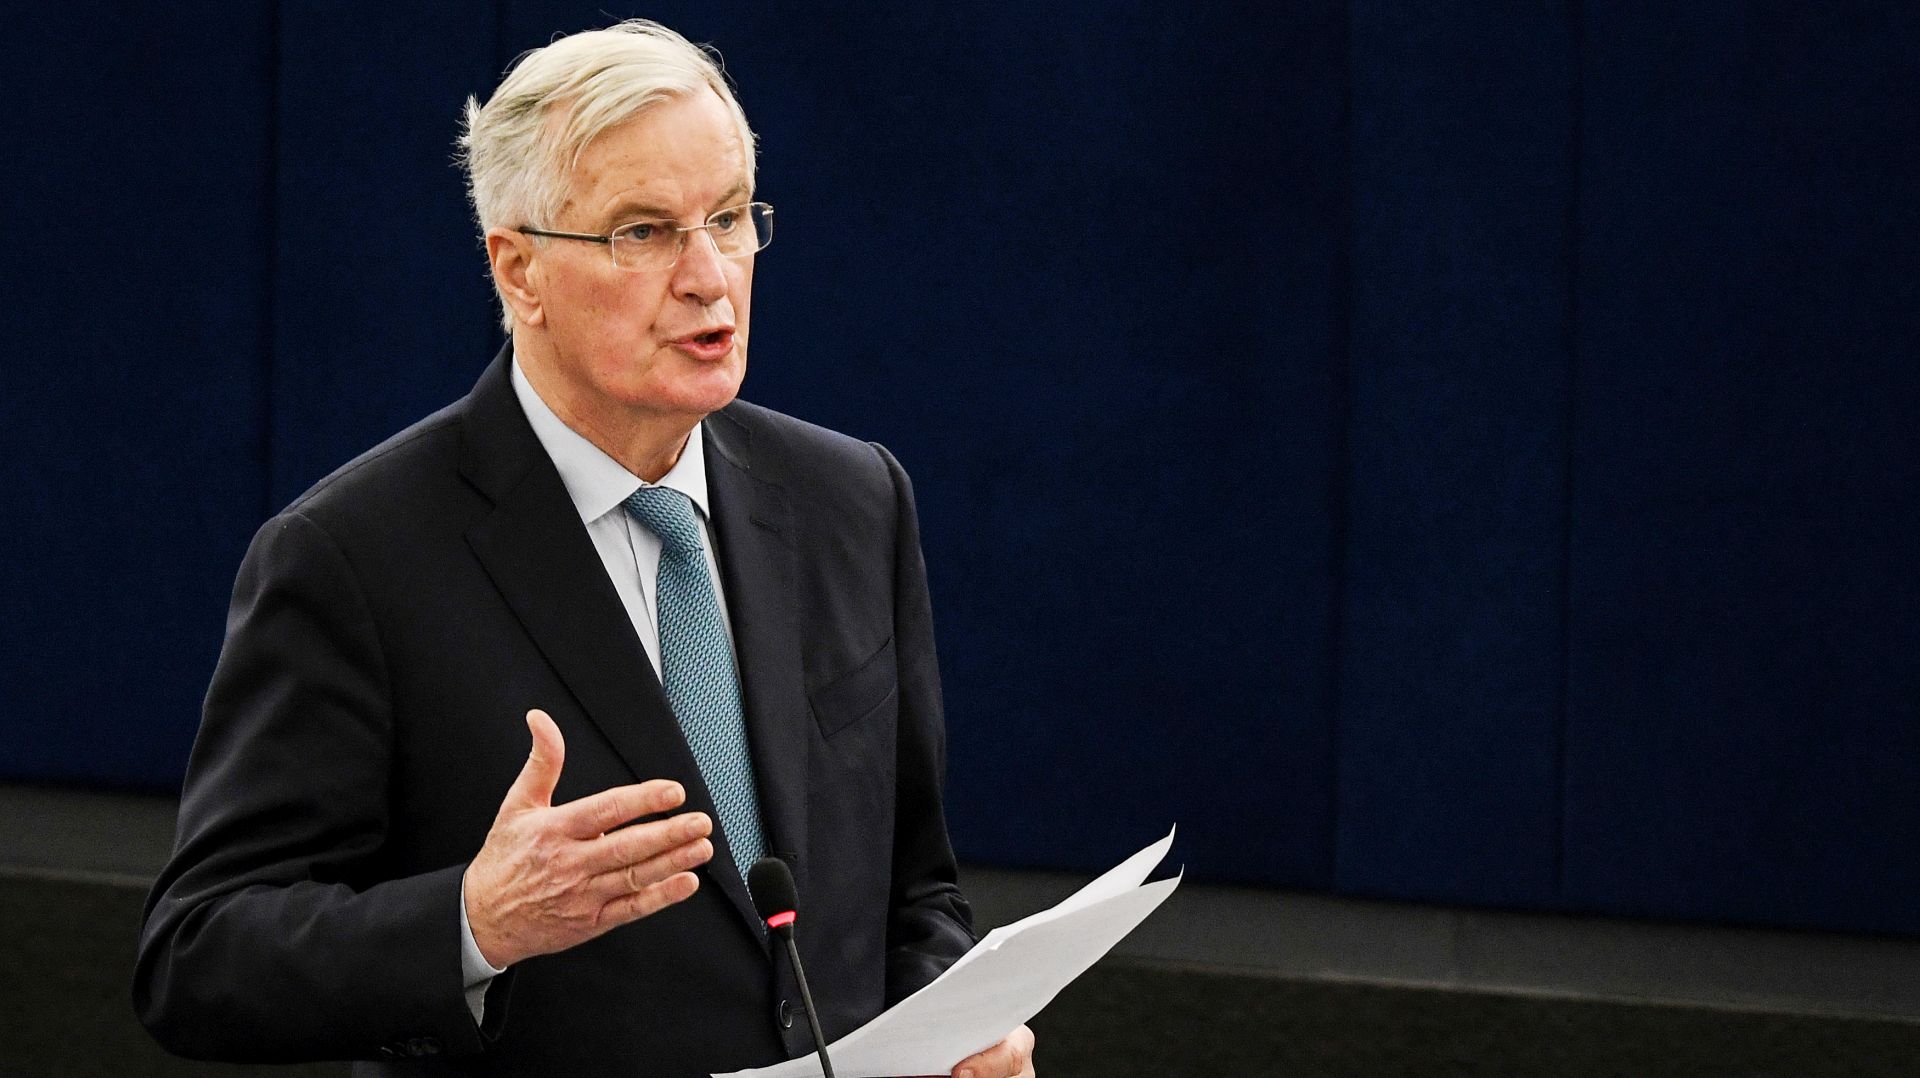 epa07288830 Michel Barnier, the European Chief Negotiator of the Task Force for the Preparation and Conduct of the Negotiations with the United Kingdom under Article 50 of the EU delivers his speech at the European Parliament in Strasbourg, France, 16 January 2019, in the debate on the UK's withdrawal from the EU. Britain's Prime Minister Theresa May was defeated in The Meaningful Vote on Brexit EU Withdrawal Agreement on 15 January.  EPA/PATRICK SEEGER